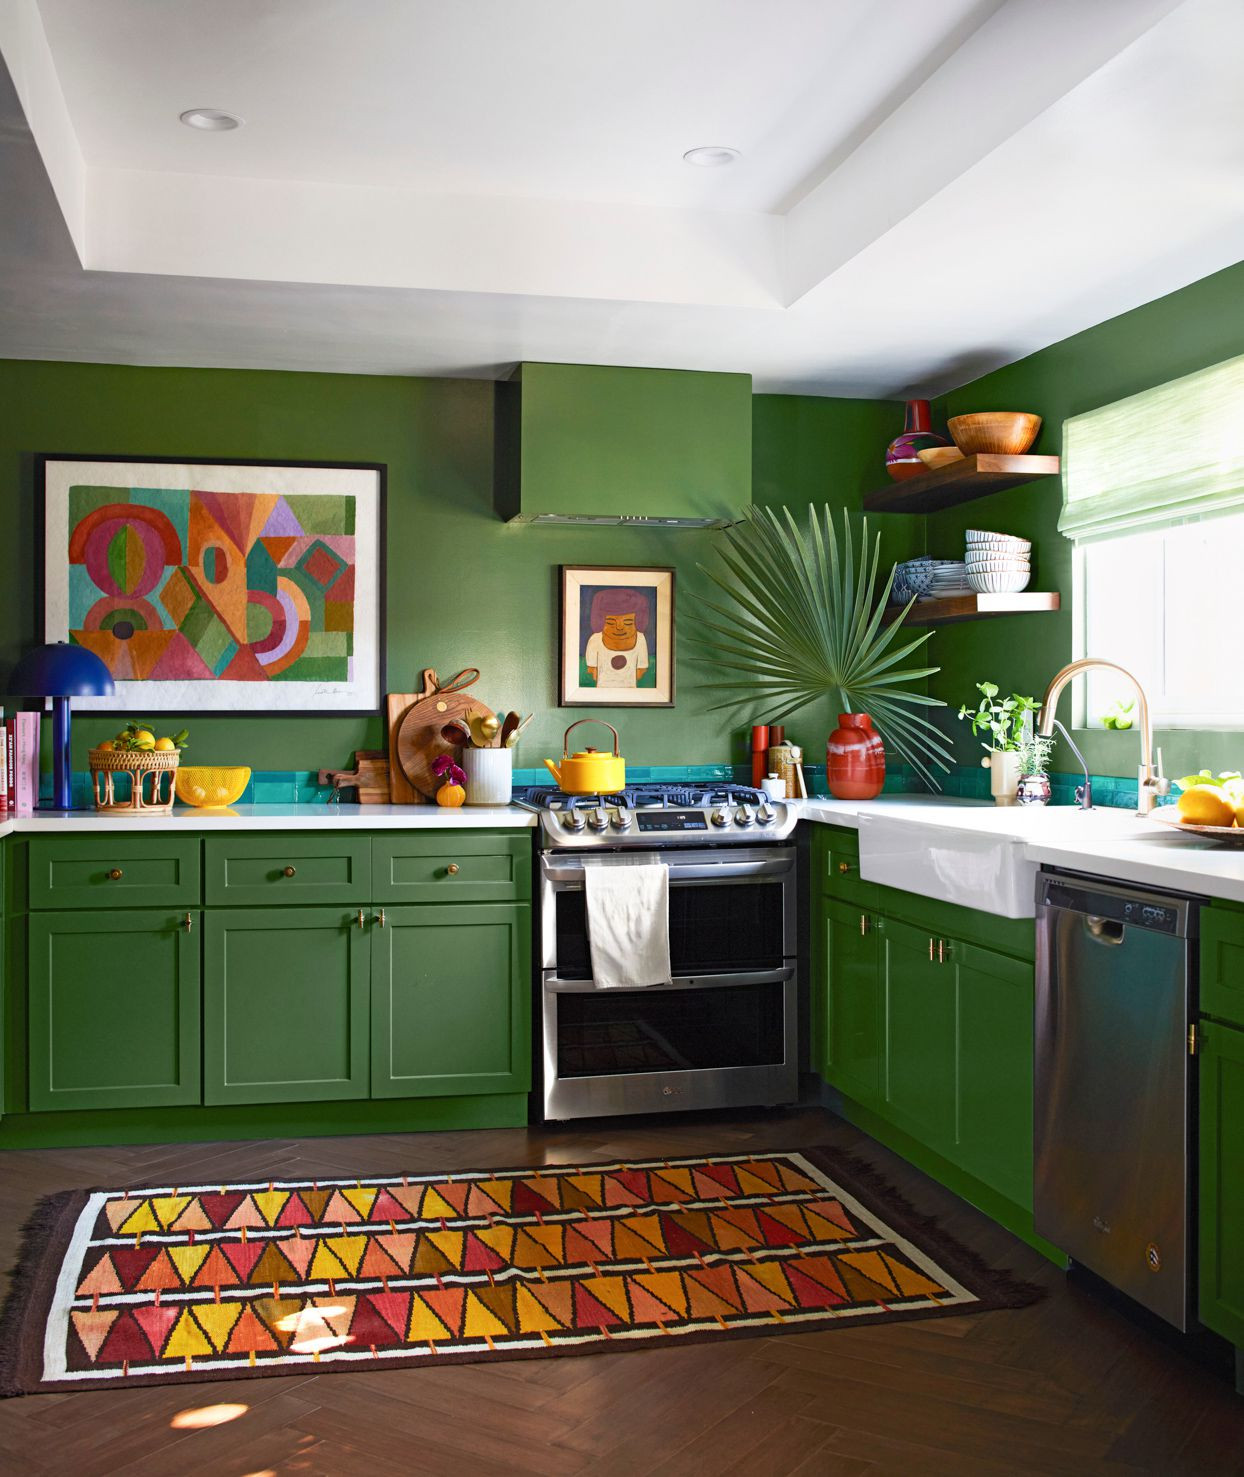 of the Best Kitchen Paint Colors to Rev Up Your Walls